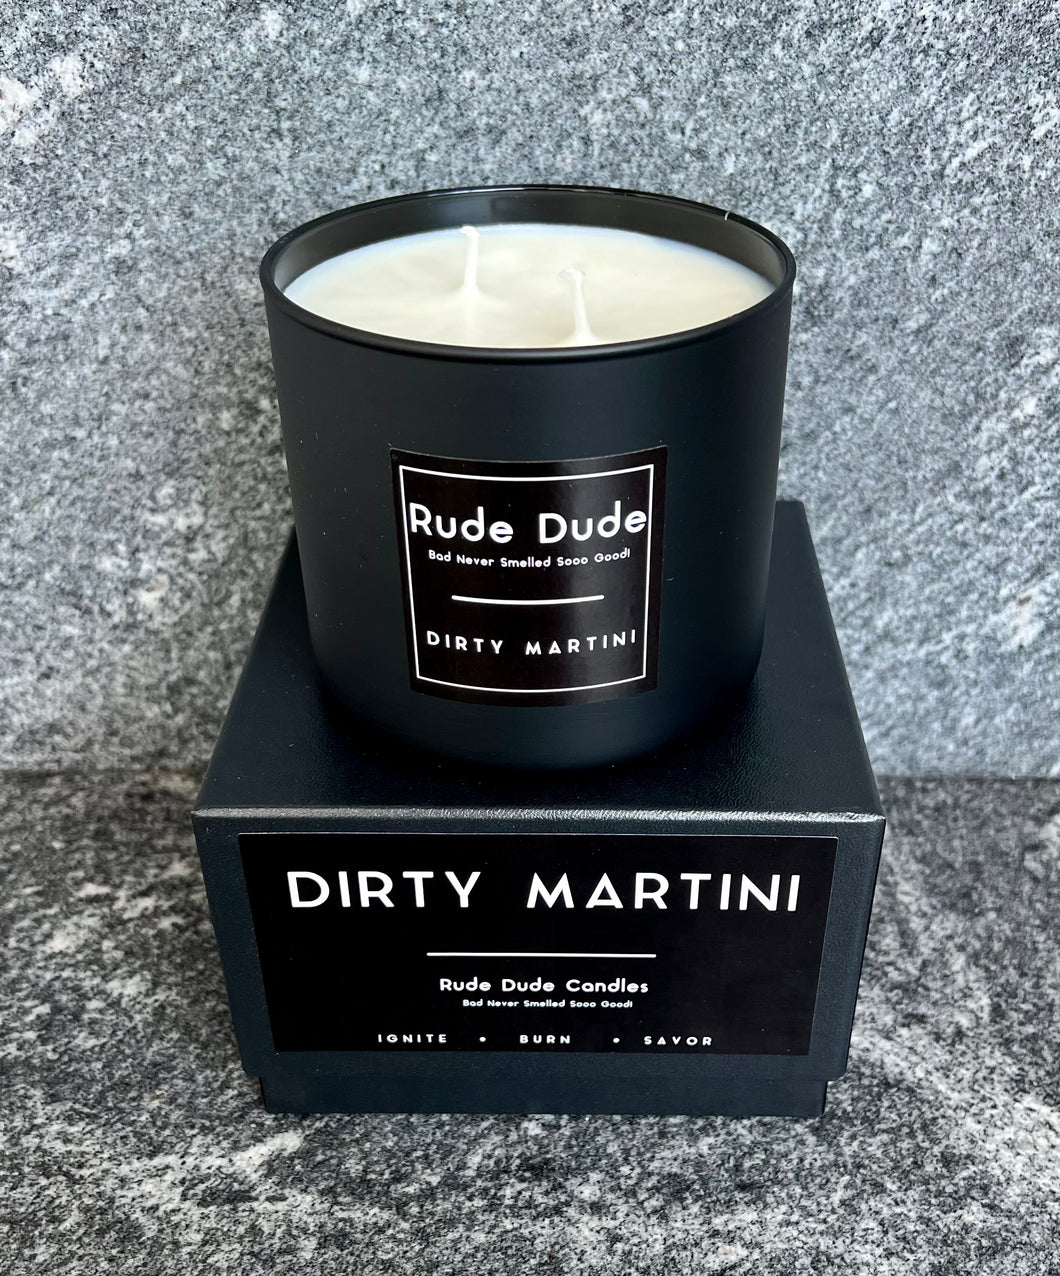 Rude Dude DIRTY MARTINI - Candle 18 oz - 512 g